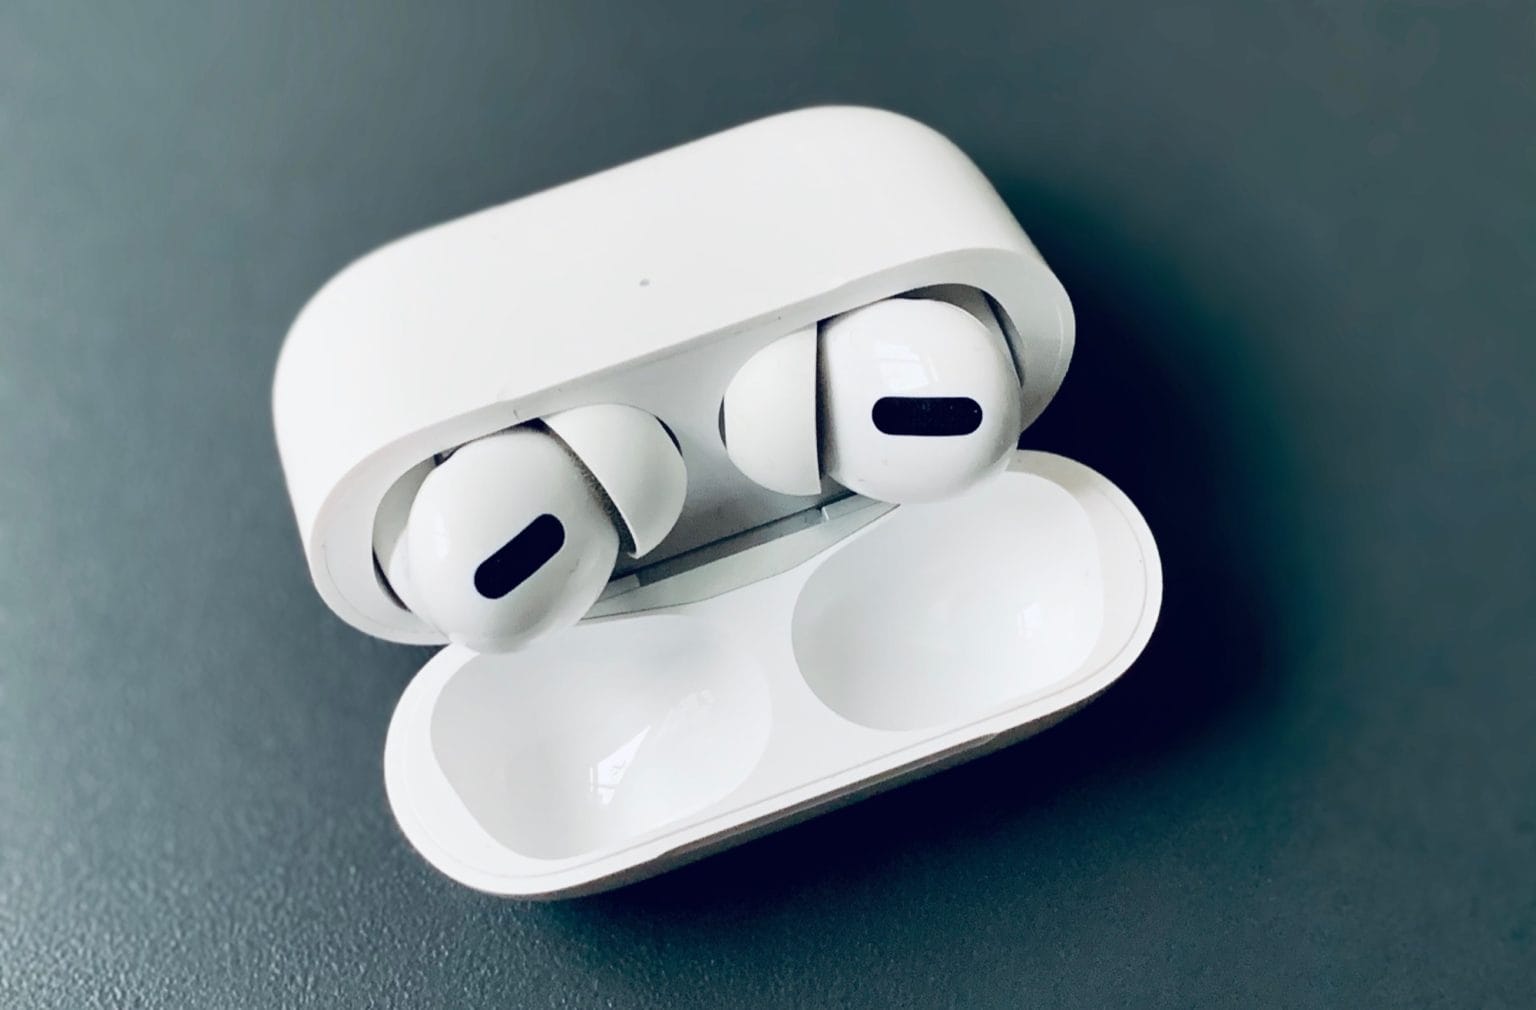 They AirPods Pro fit in their case like nothing ever happened.